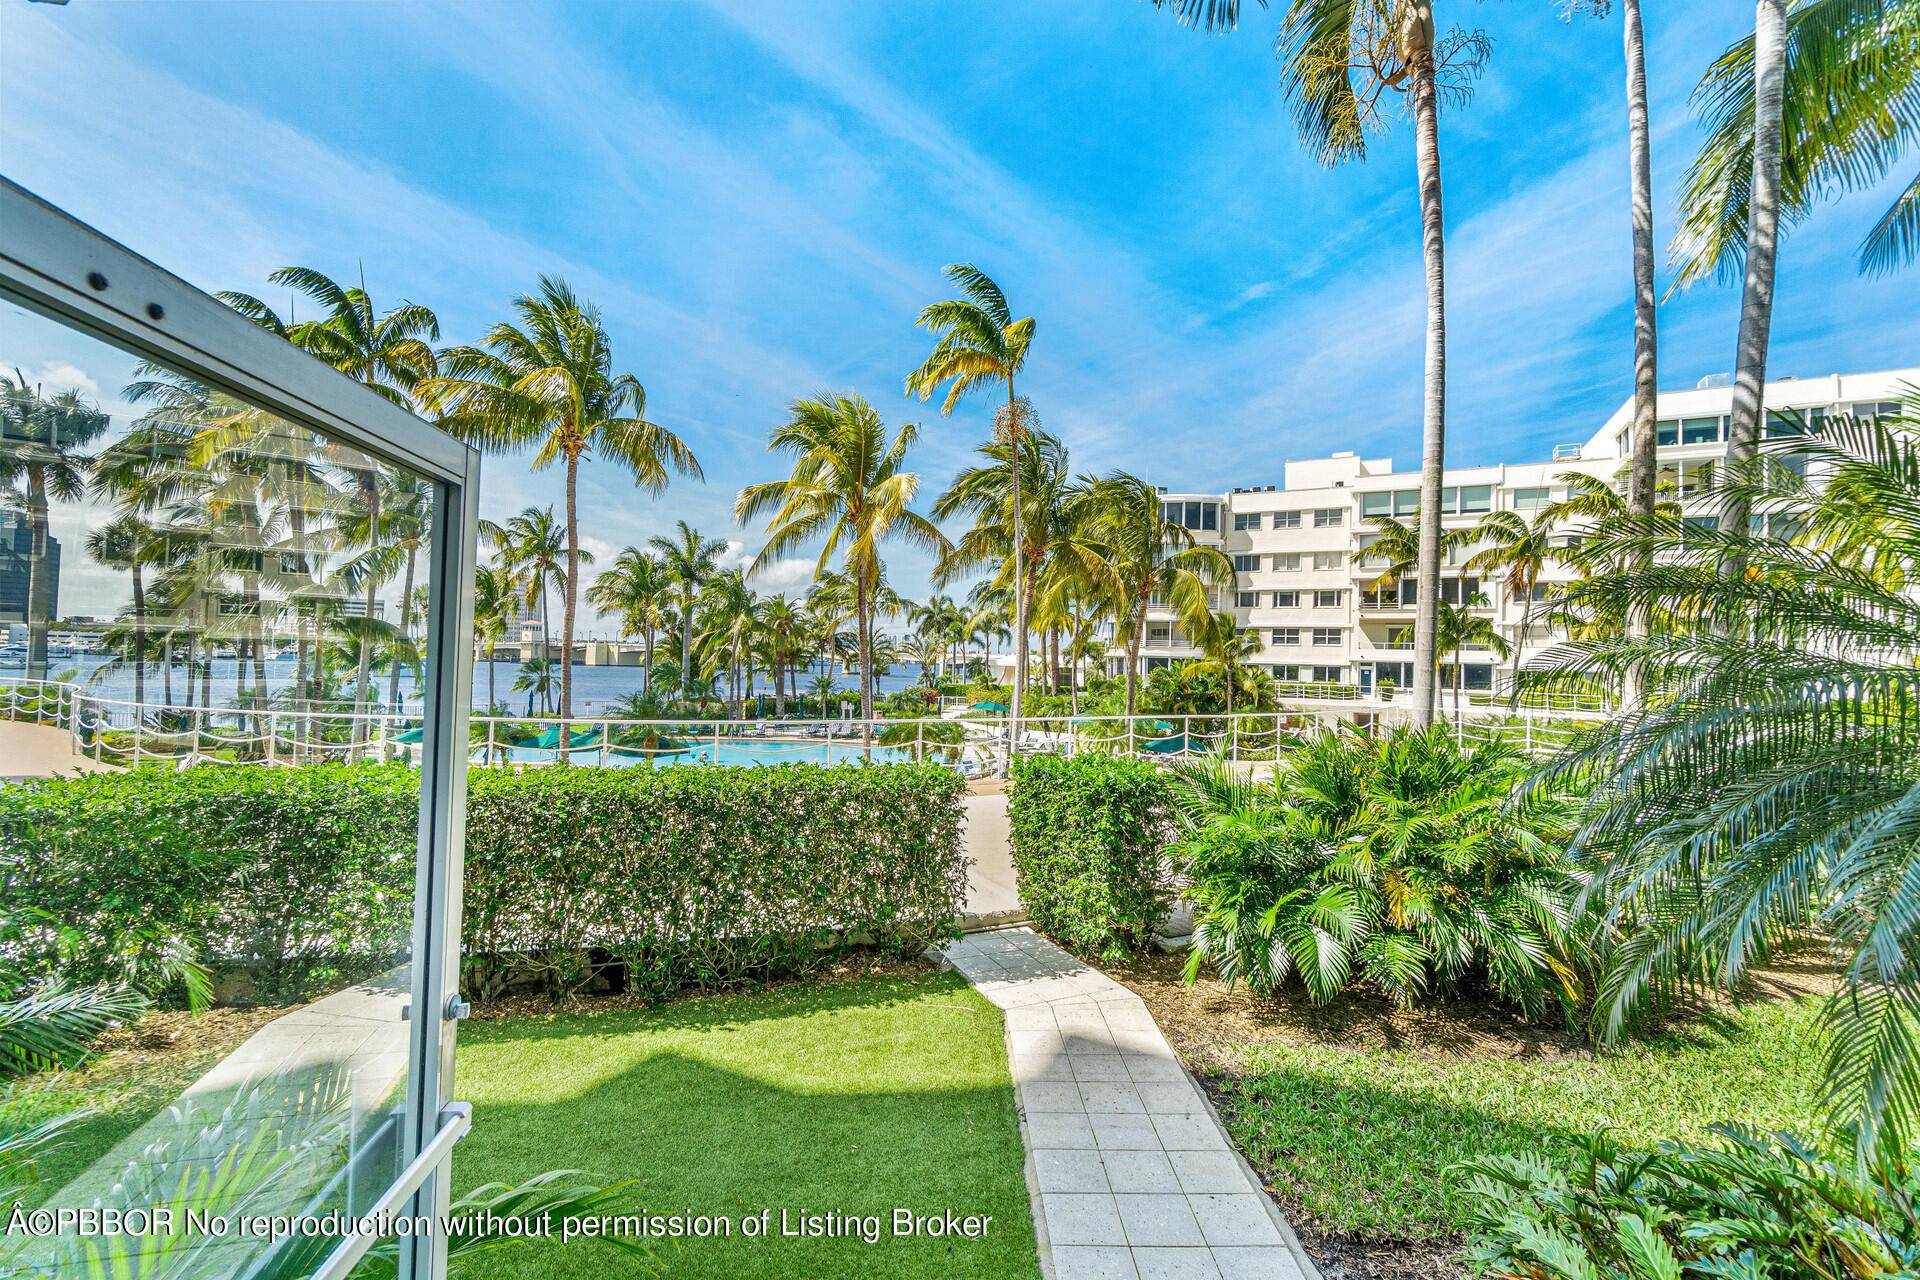 Walk directly out of this sun filled apartment from your very own private entrance and landscaped path onto the tranquil garden promenade.